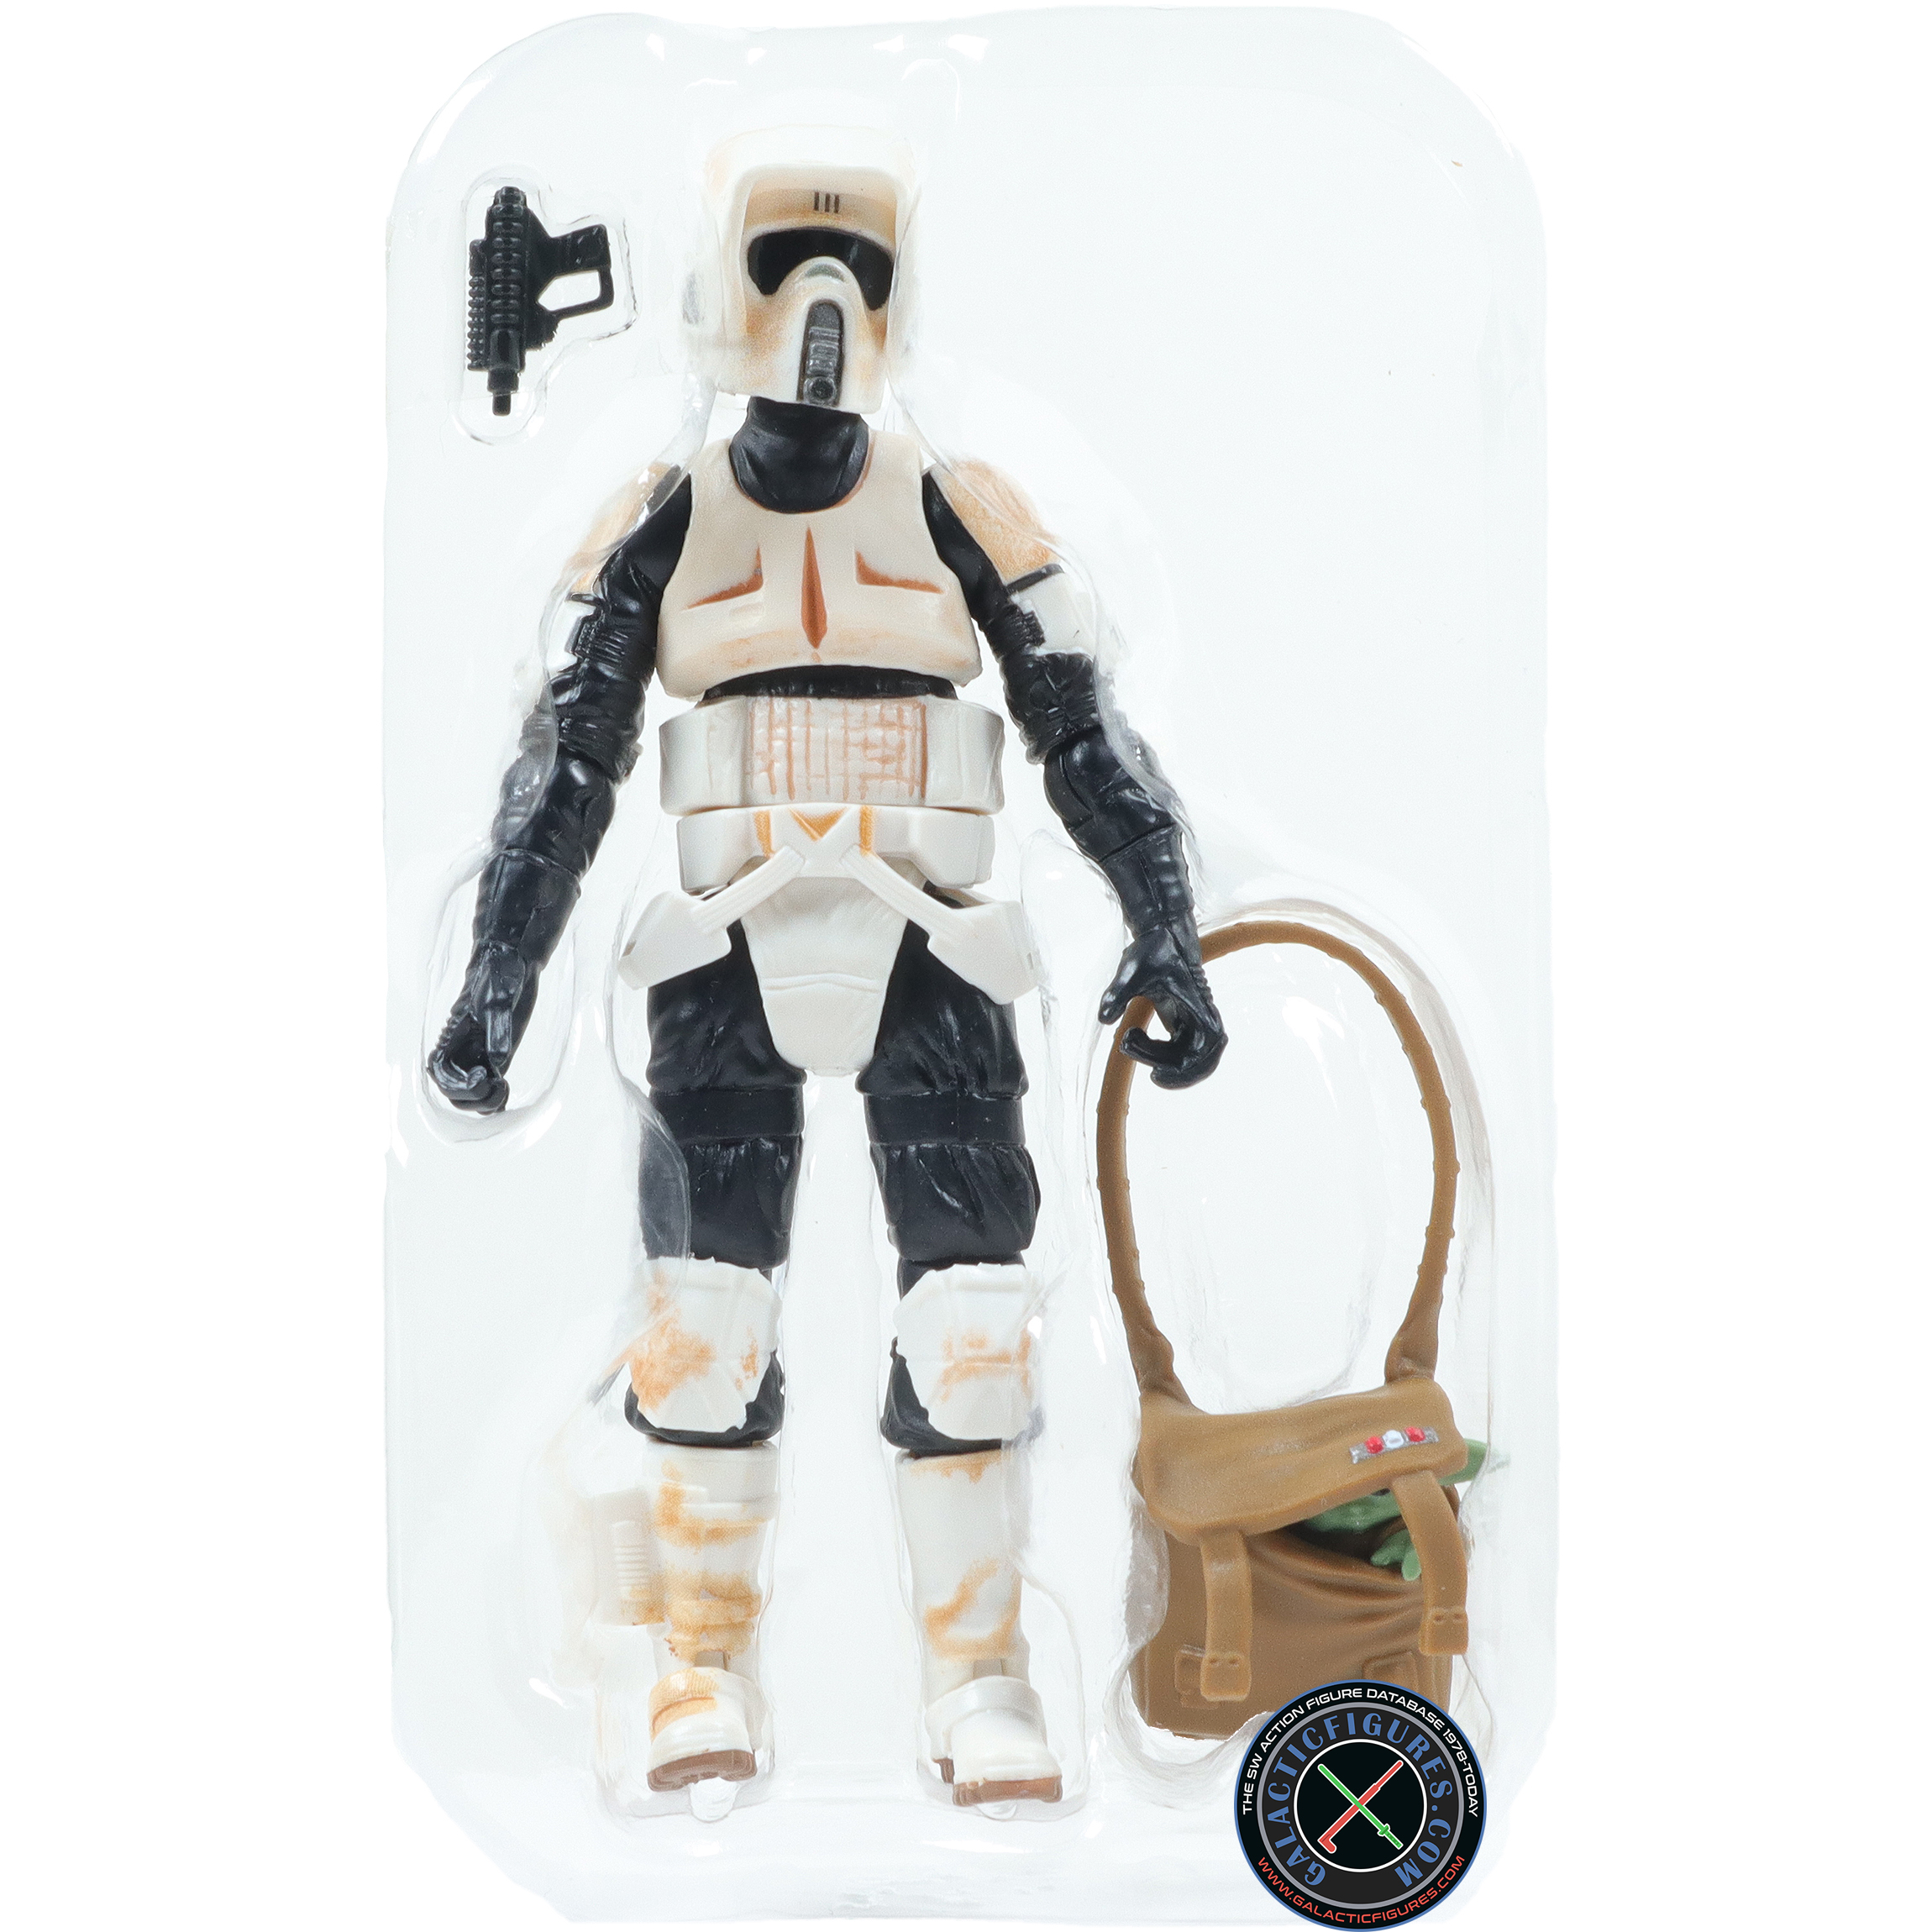 Biker Scout With Speeder Bike (from The Mandalorian)